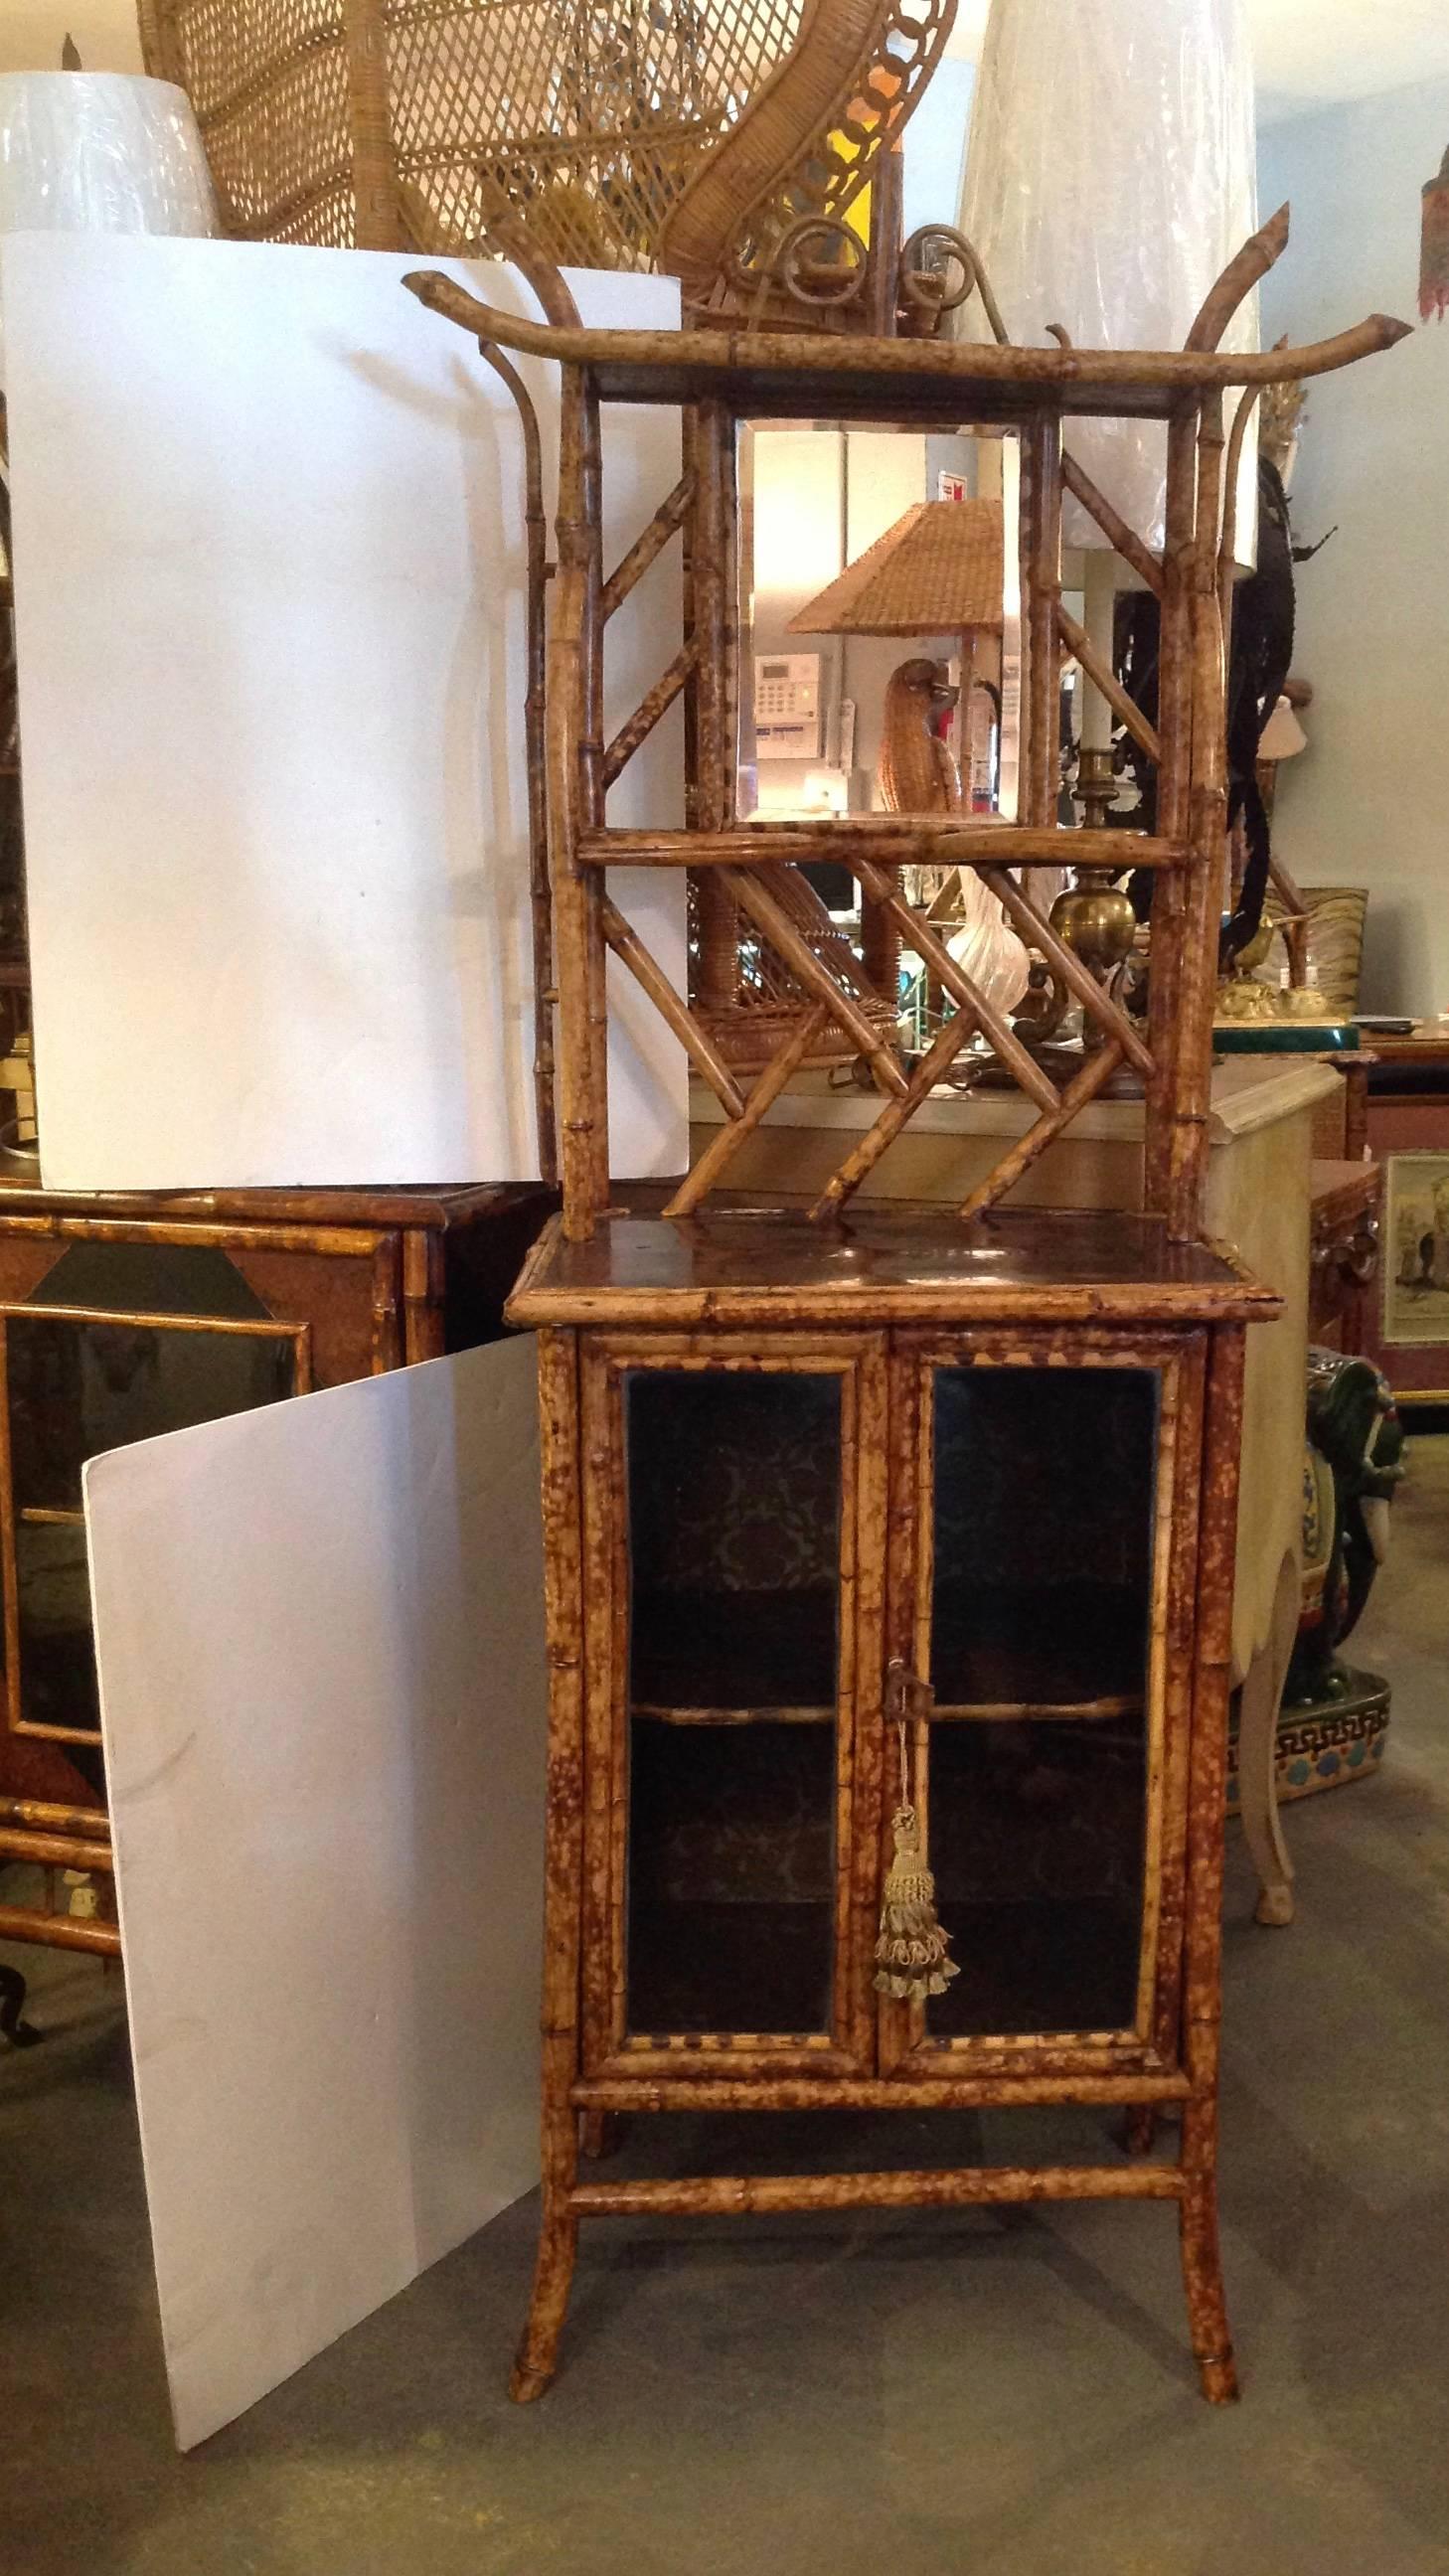 The cabinet is fitted with ample storage for large books.
It is appointed with an elaborate étagère top and mirror.